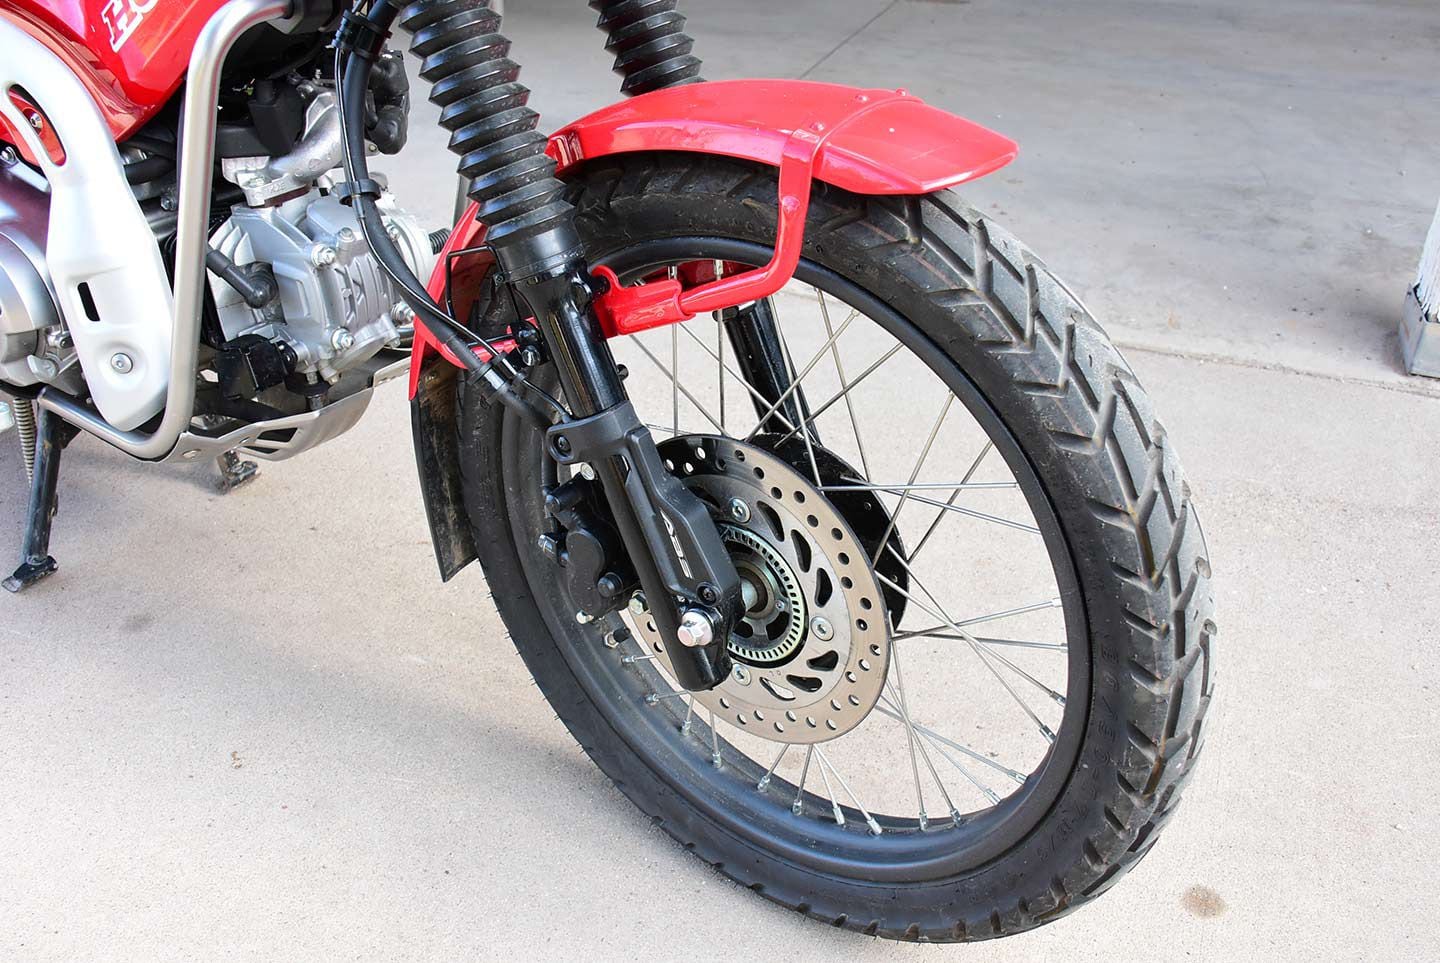 One thing the early-generation Trail models didn’t have is hydraulic brakes with ABS. The 17-inch IRC tires provided good grip on road and off.